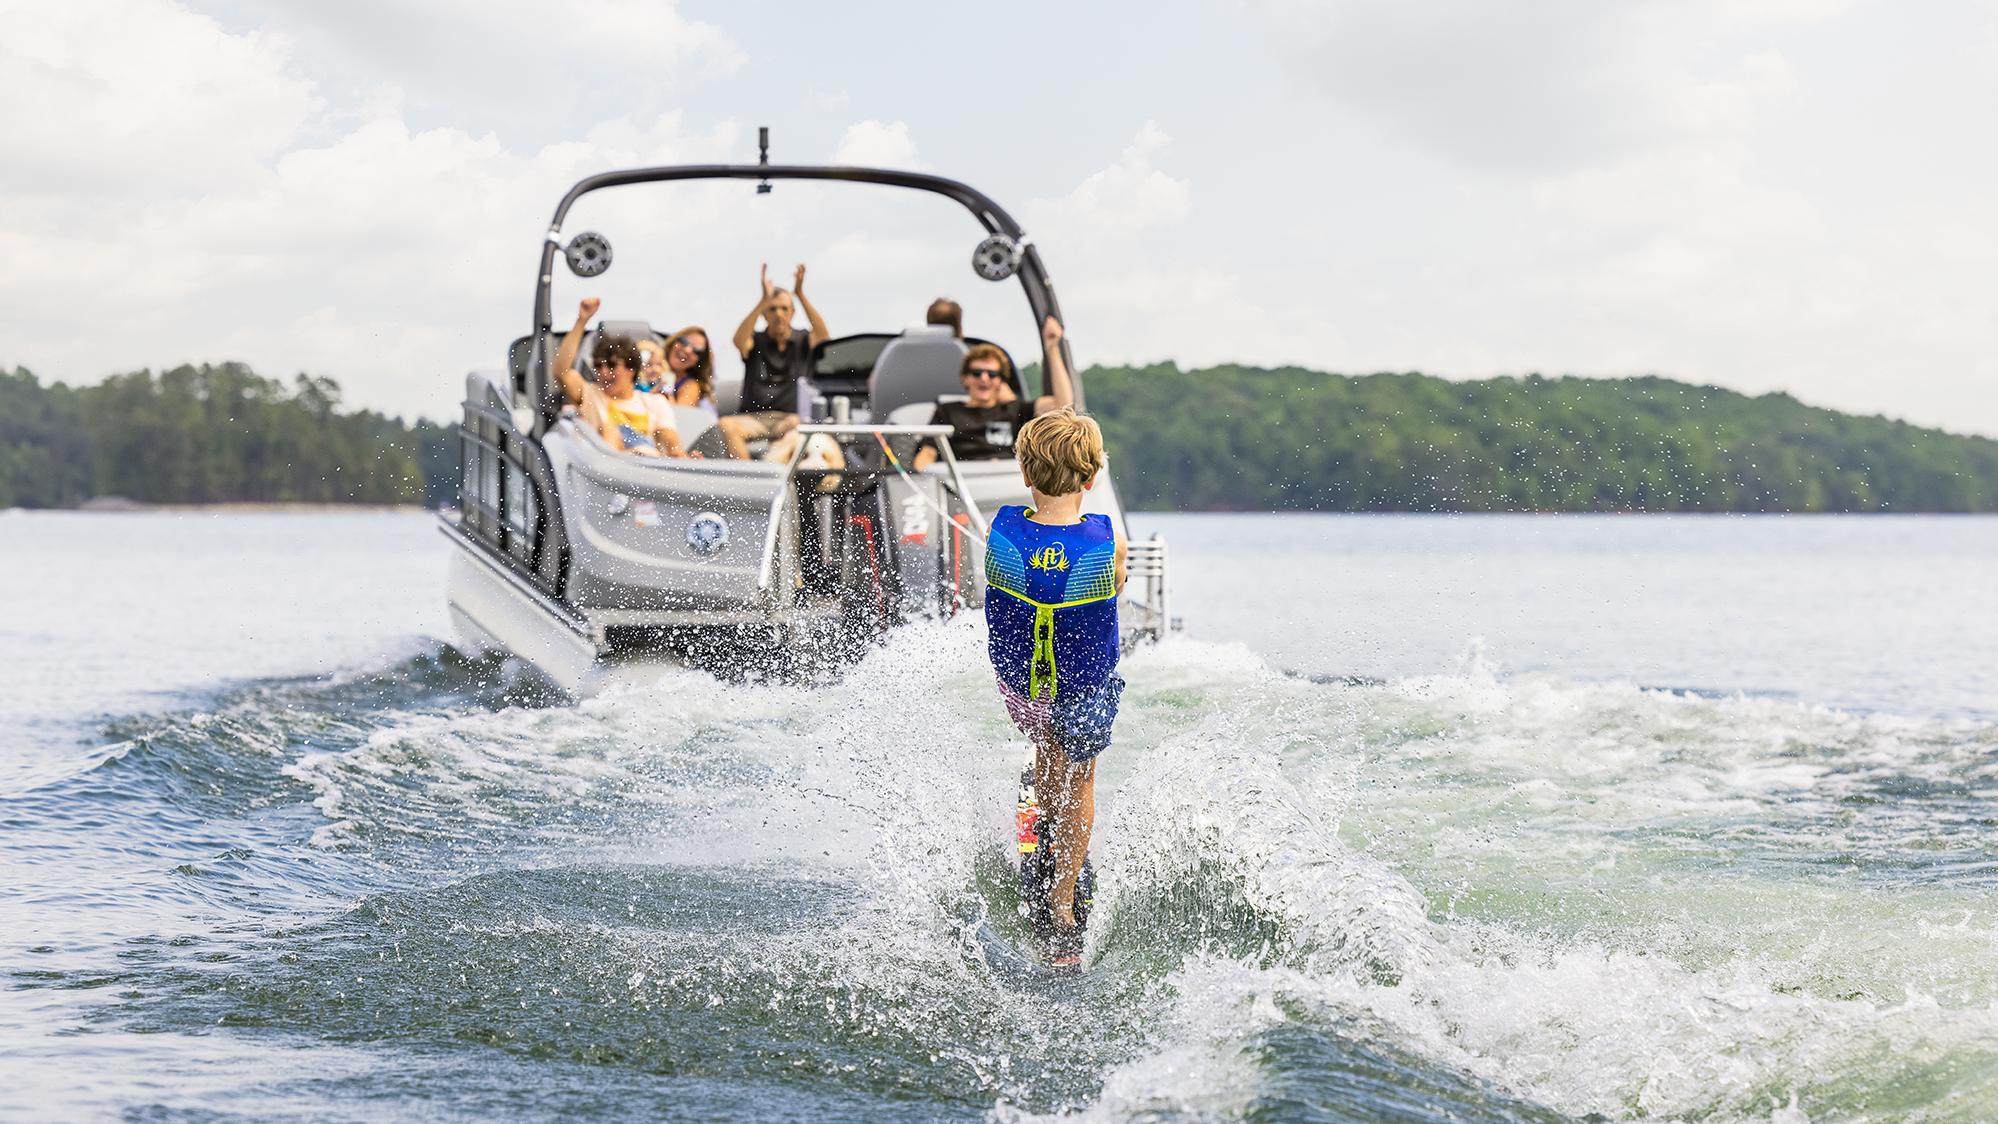 CAN A PONTOON BOAT PULL A SKIER?